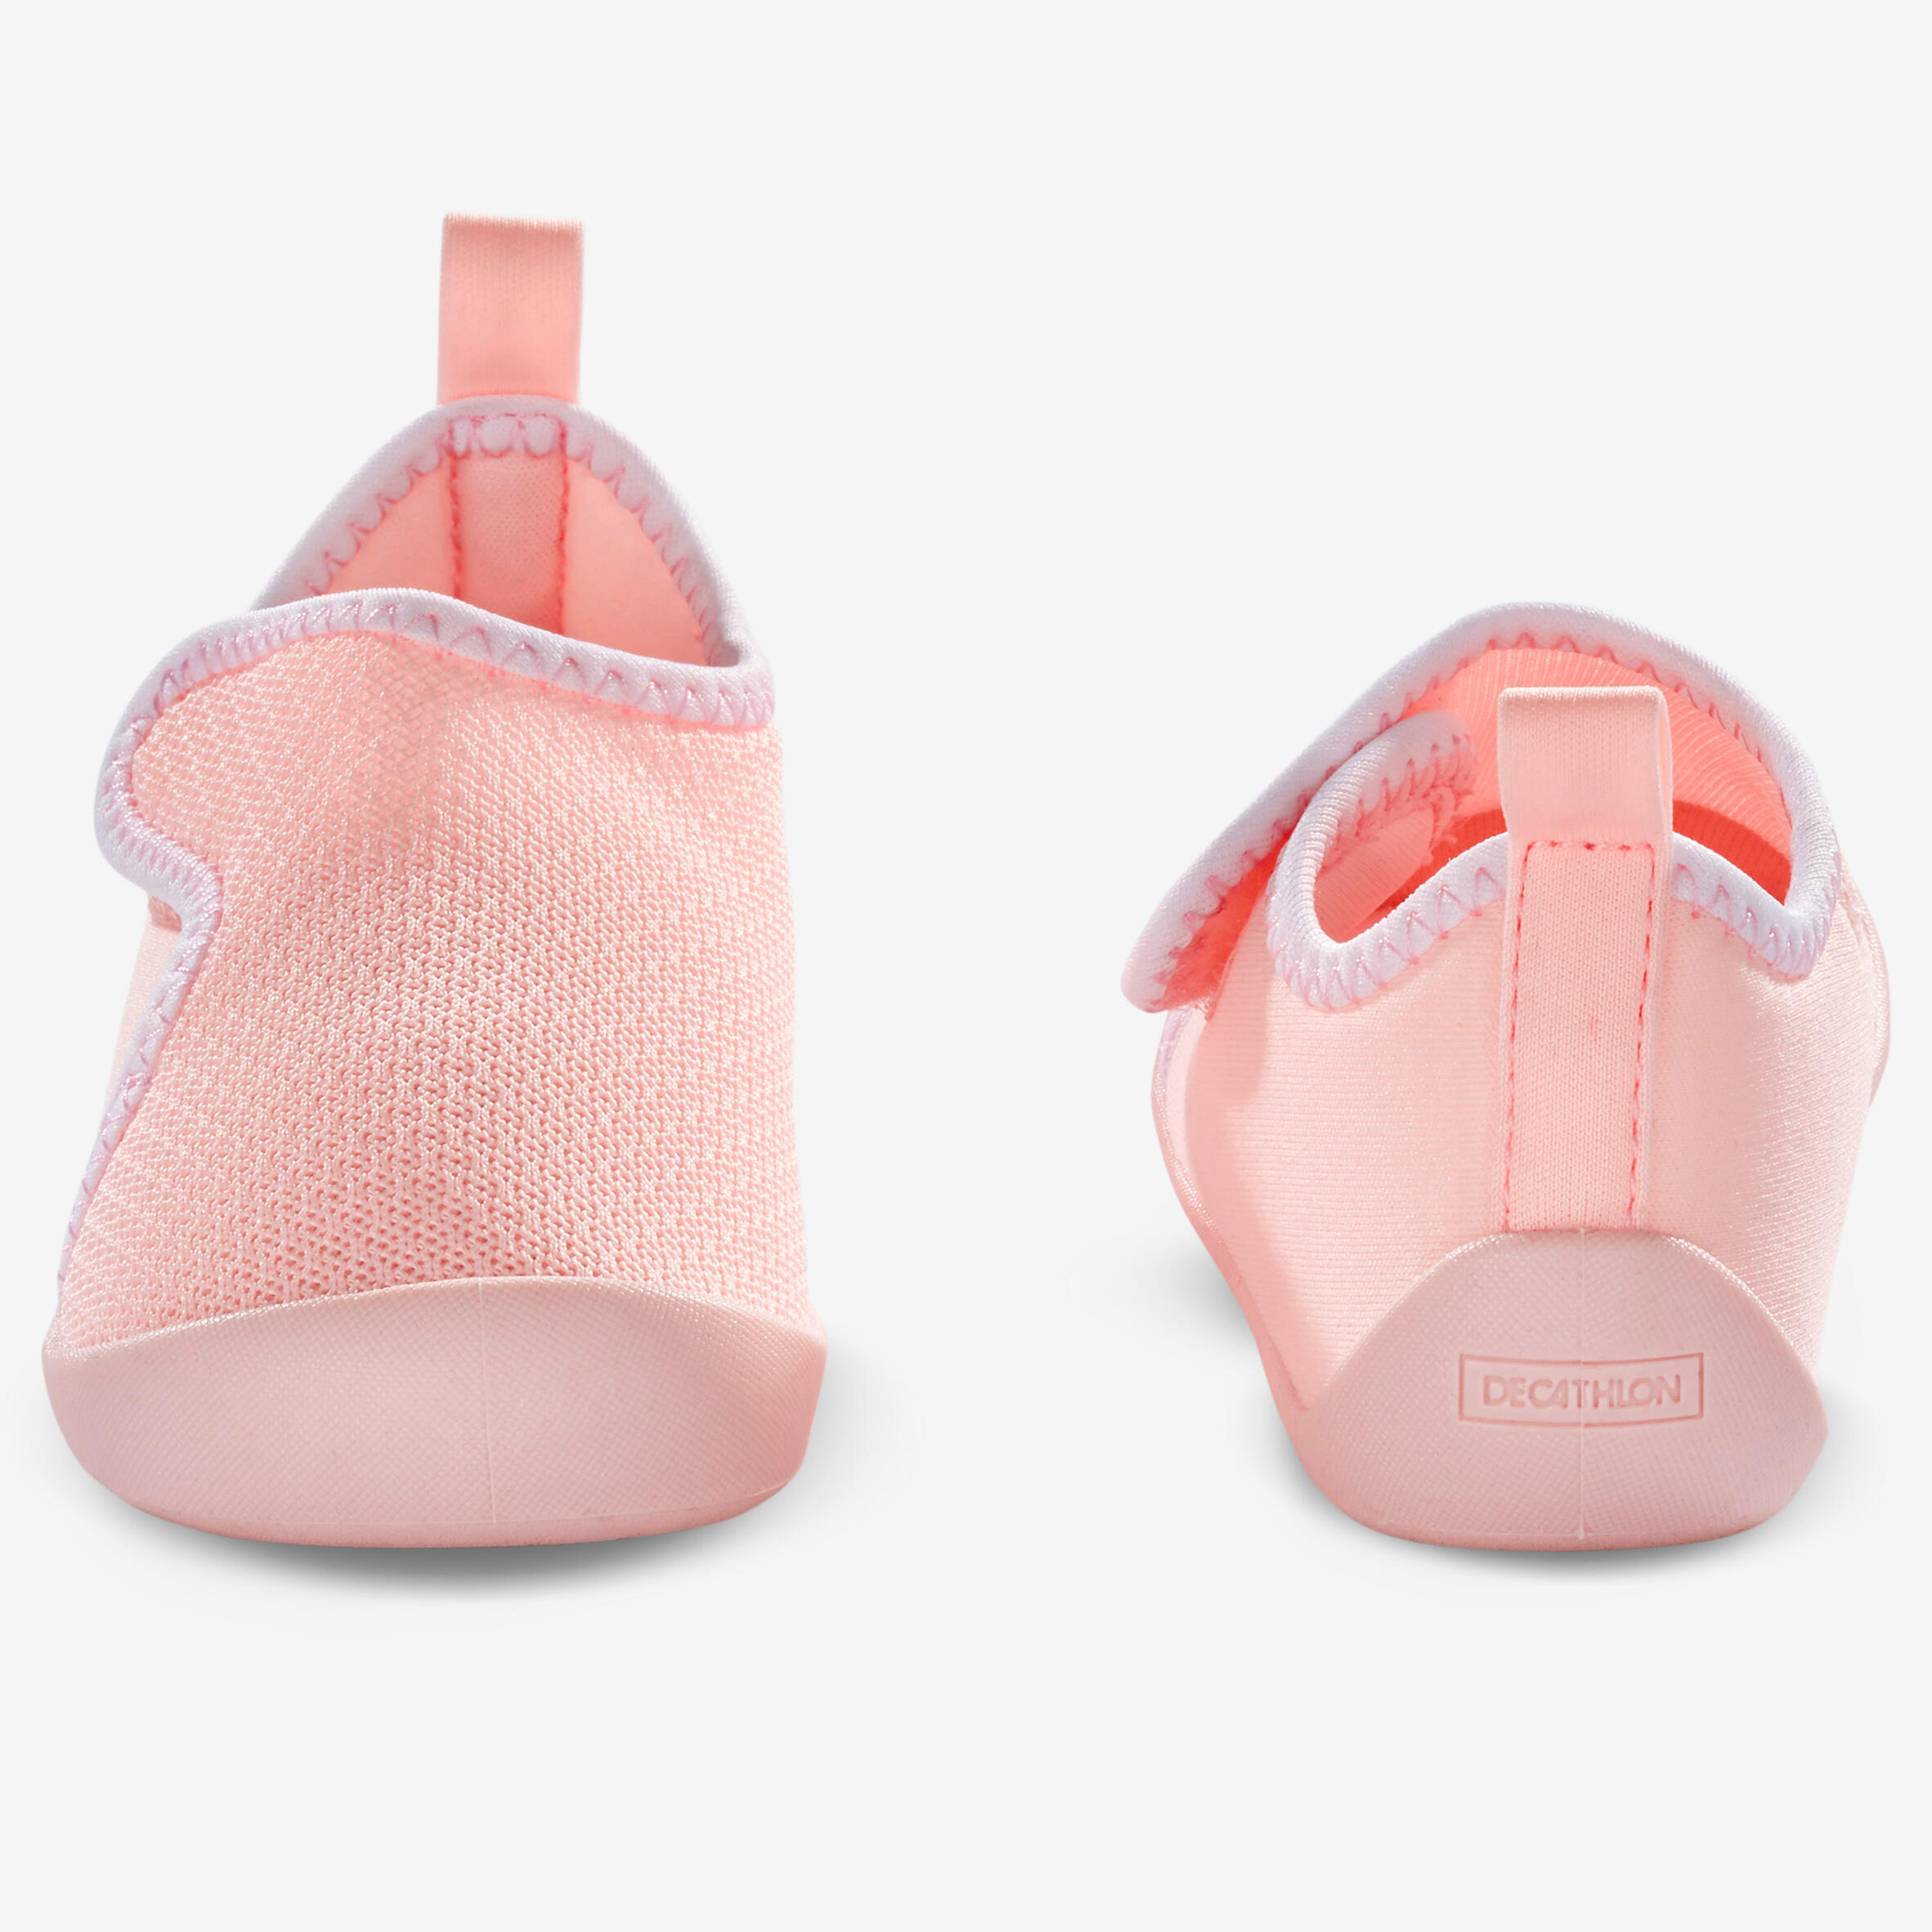 Kids' Bootees - Pink 3/8